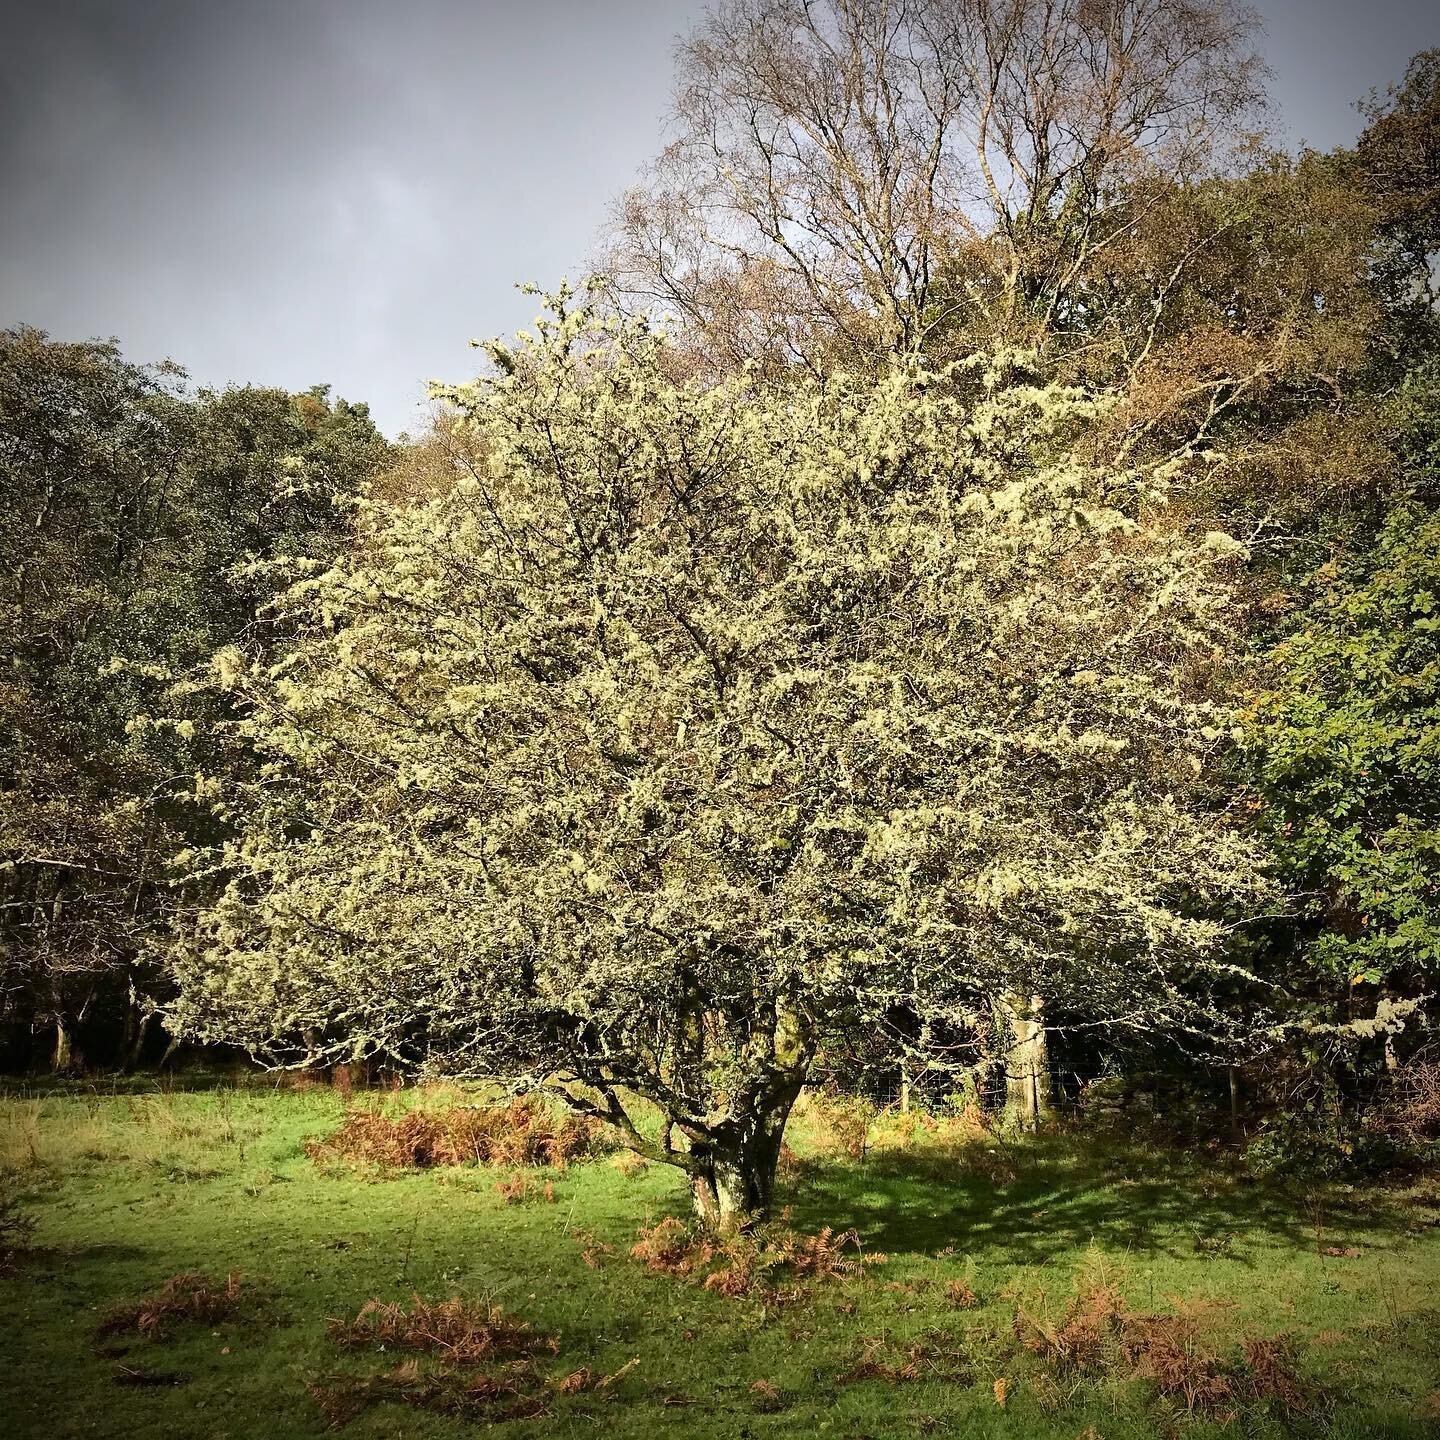 Discover the beauty and stillness of Autumn here at Cefn Coed...

A resident Hawthorn drenched in Old Mans Beard, simply magical! 😍